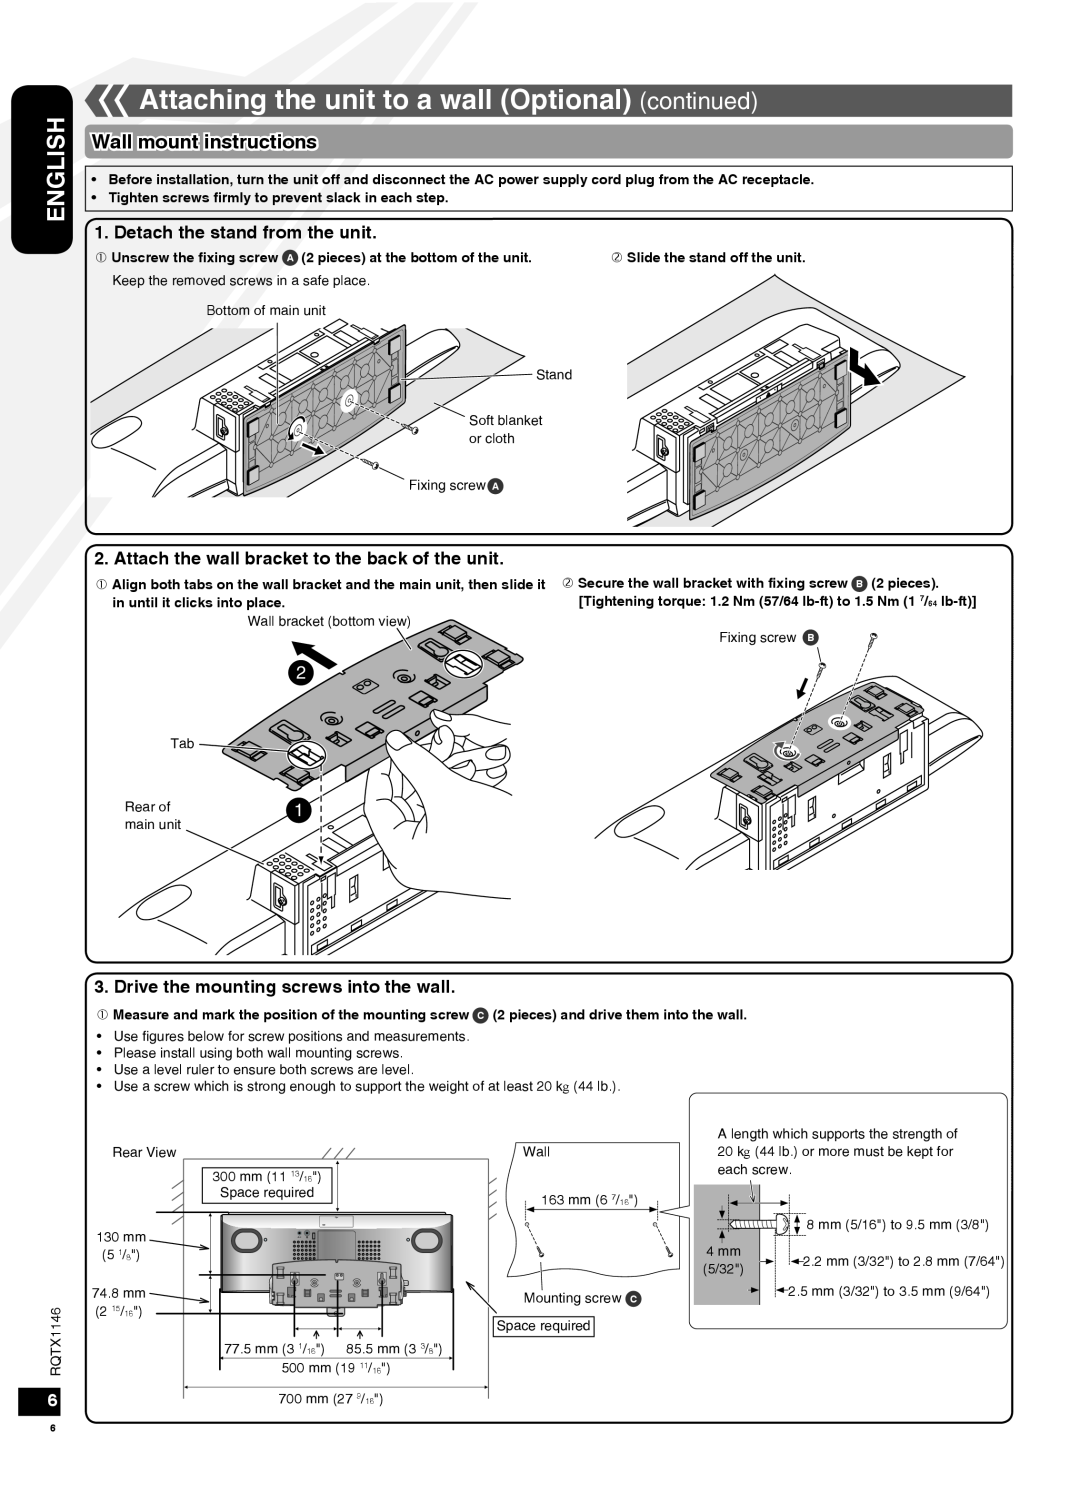 Panasonic SC-HC40 Attaching the unit to a wall Optional continued, Wall mount instructions, Detach the stand from the unit 